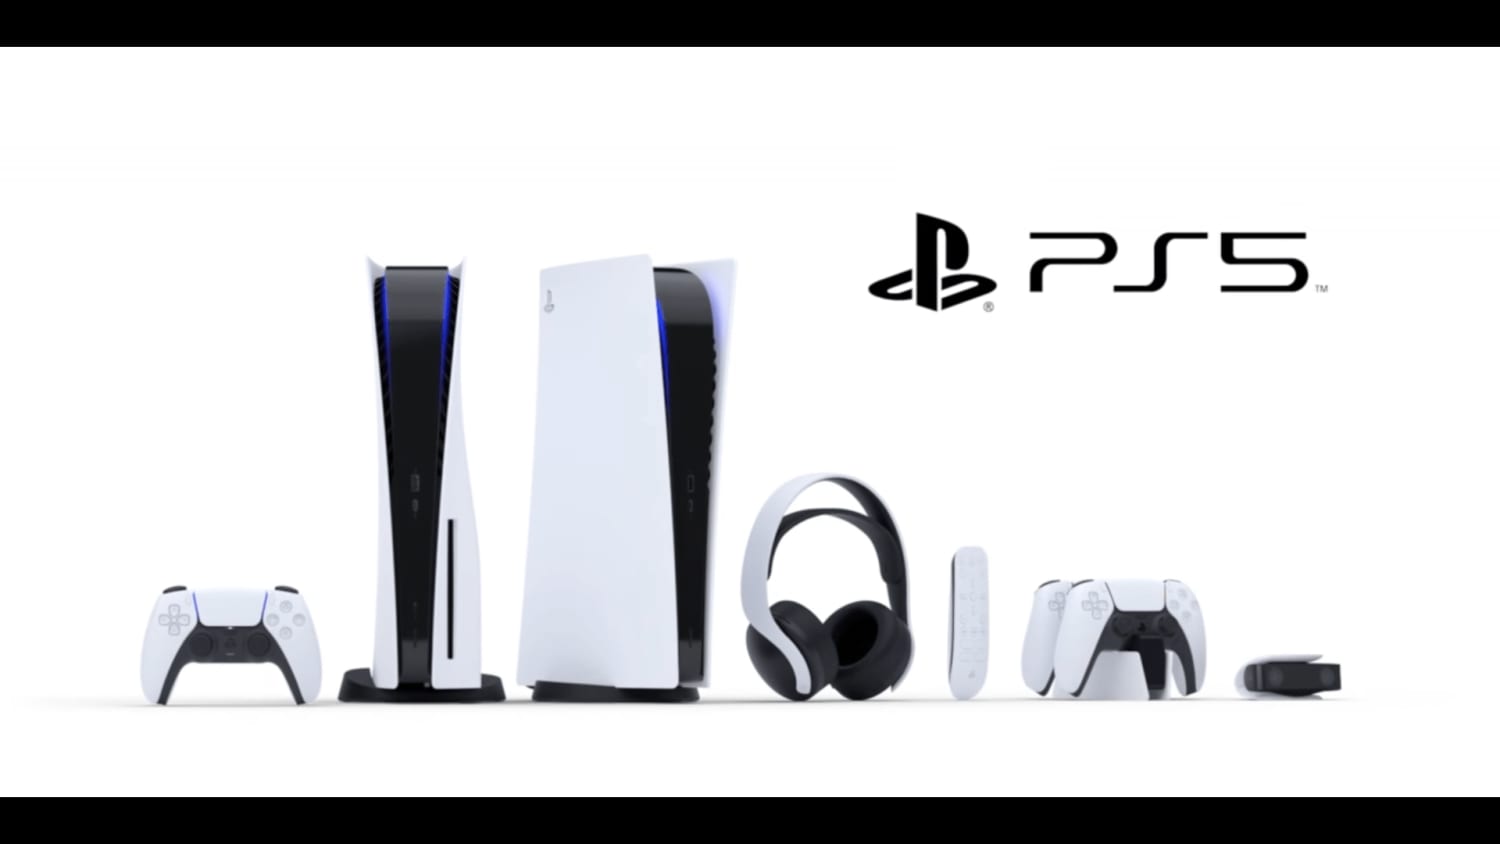 PS 5: The futuristic gaming play station consoles